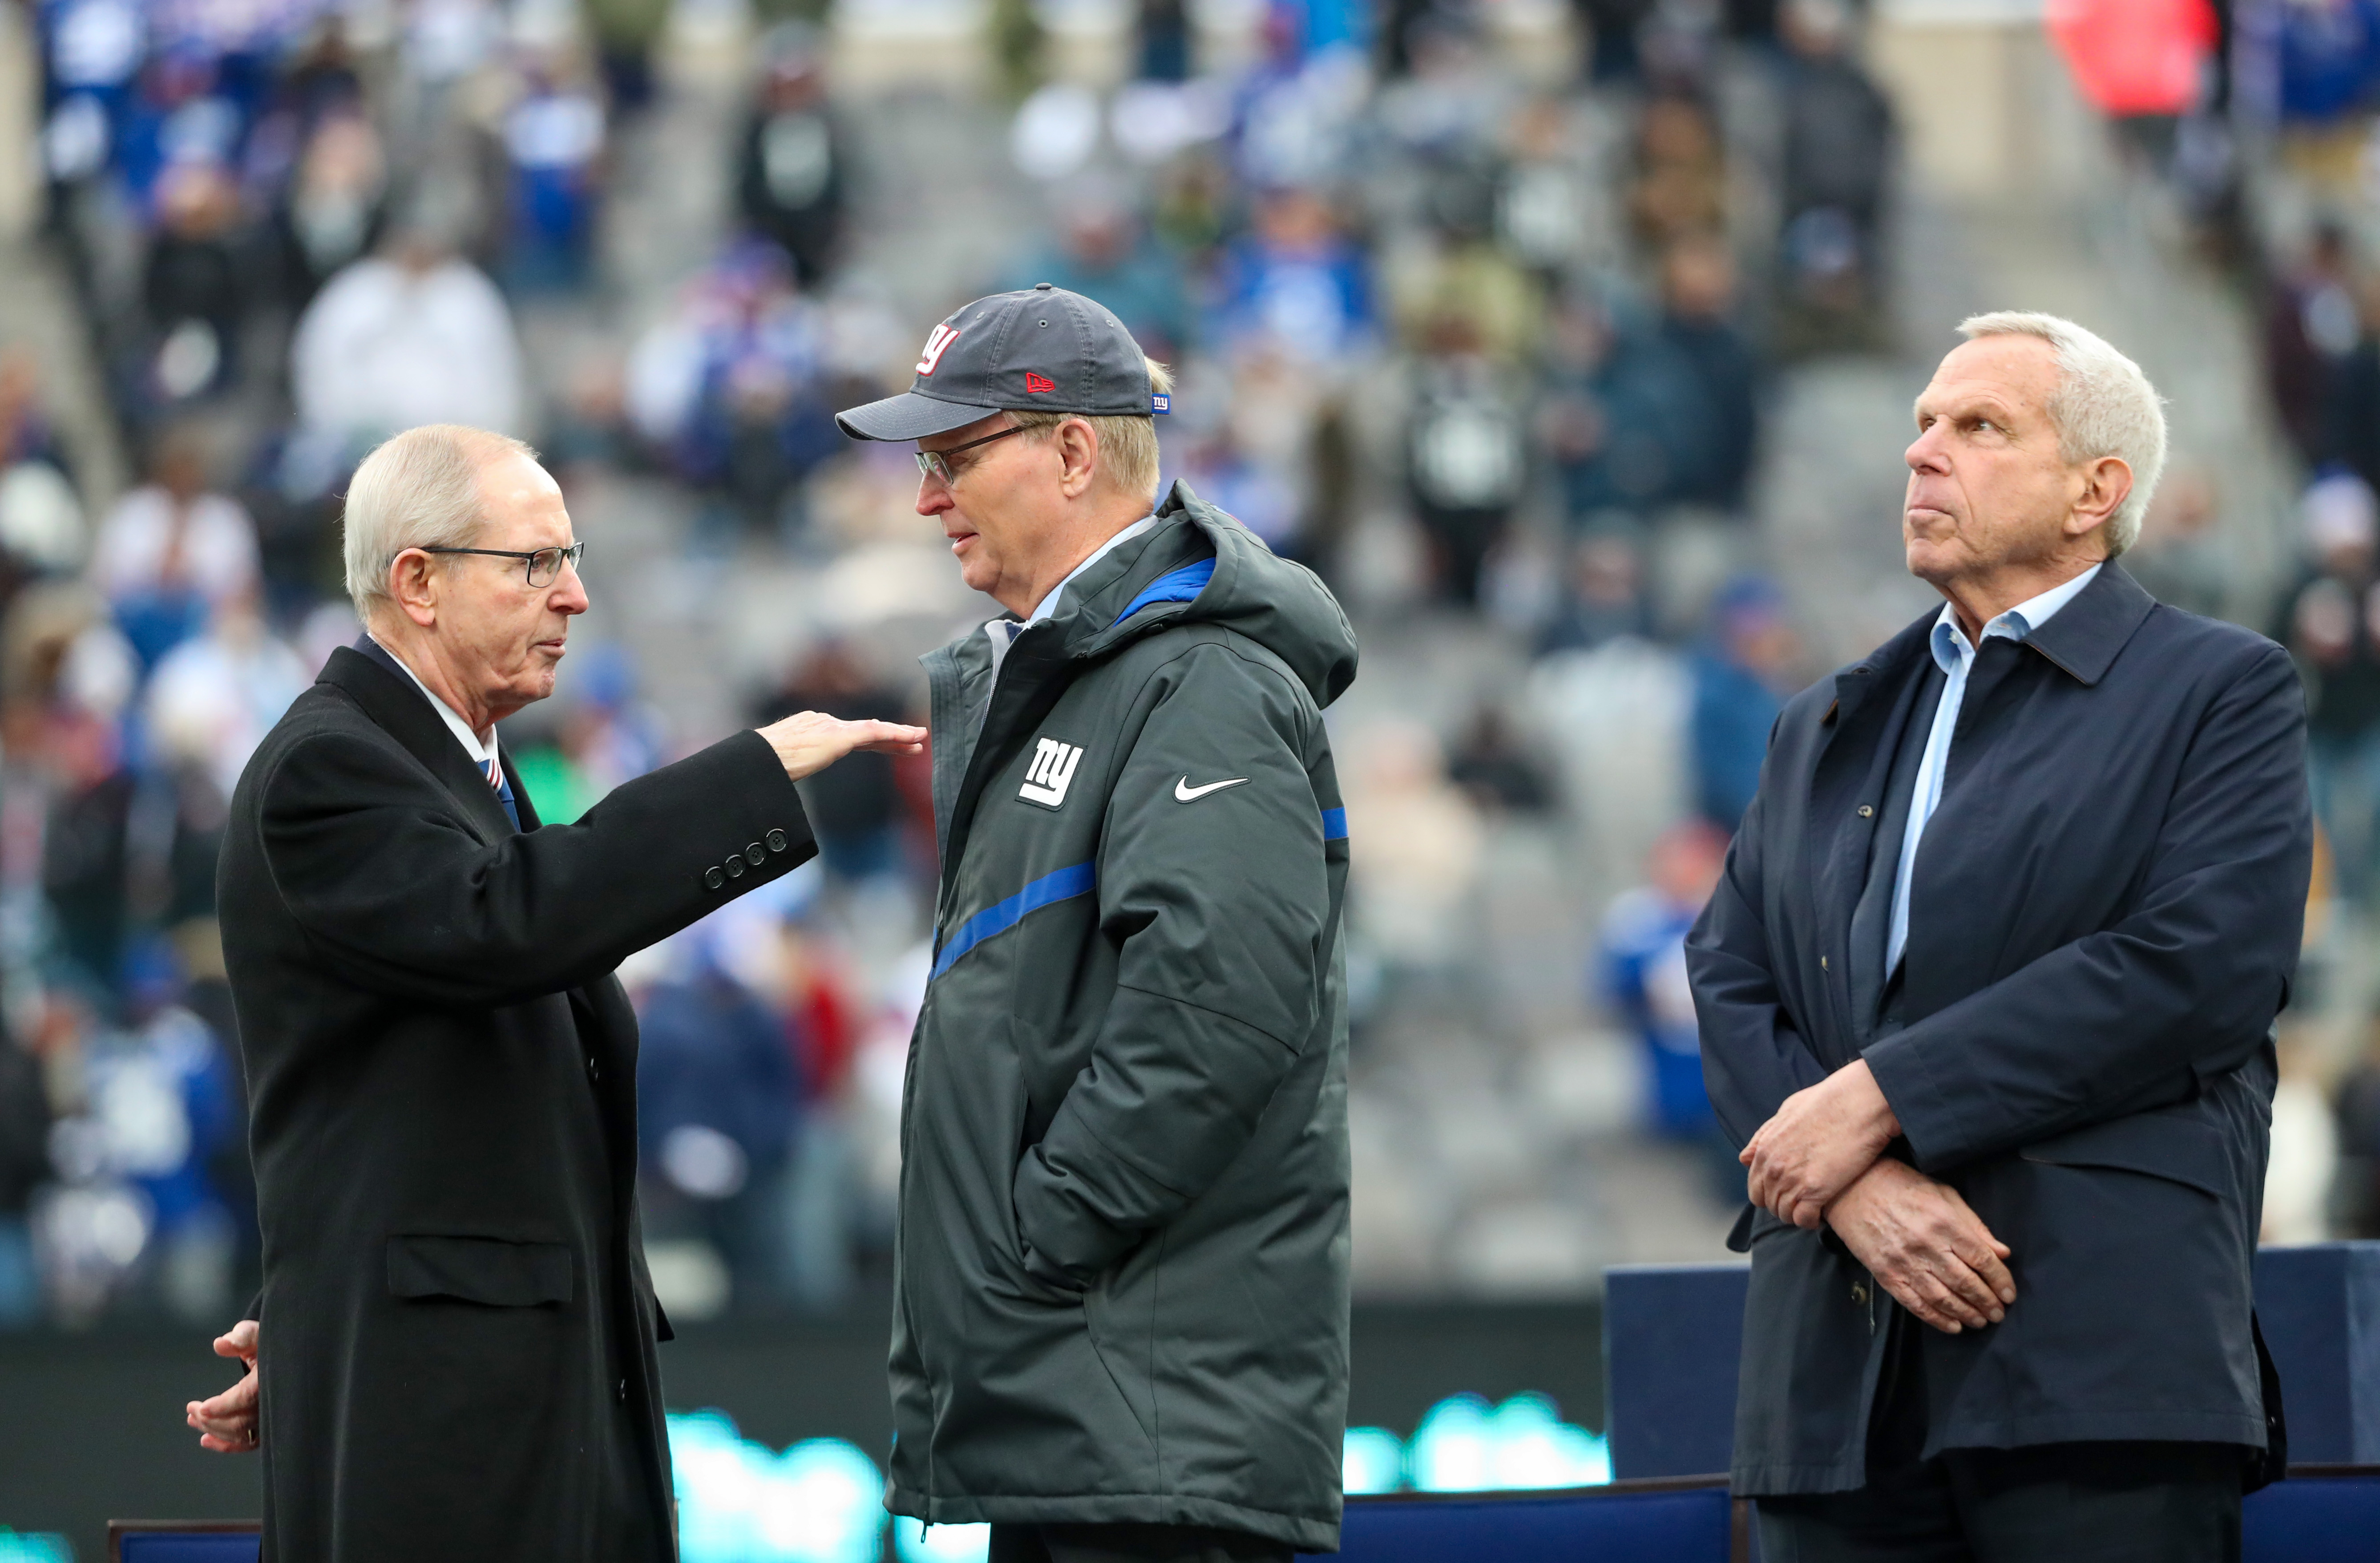 Former New York Giants head coach Tom Coughlin (left) speaks with Giants owners John Mara (center) and Steve Tisch during a halftime ceremony to honor hall of fame Michael Strahan on Sunday, Nov. 28, 2021 at MetLife Stadium.